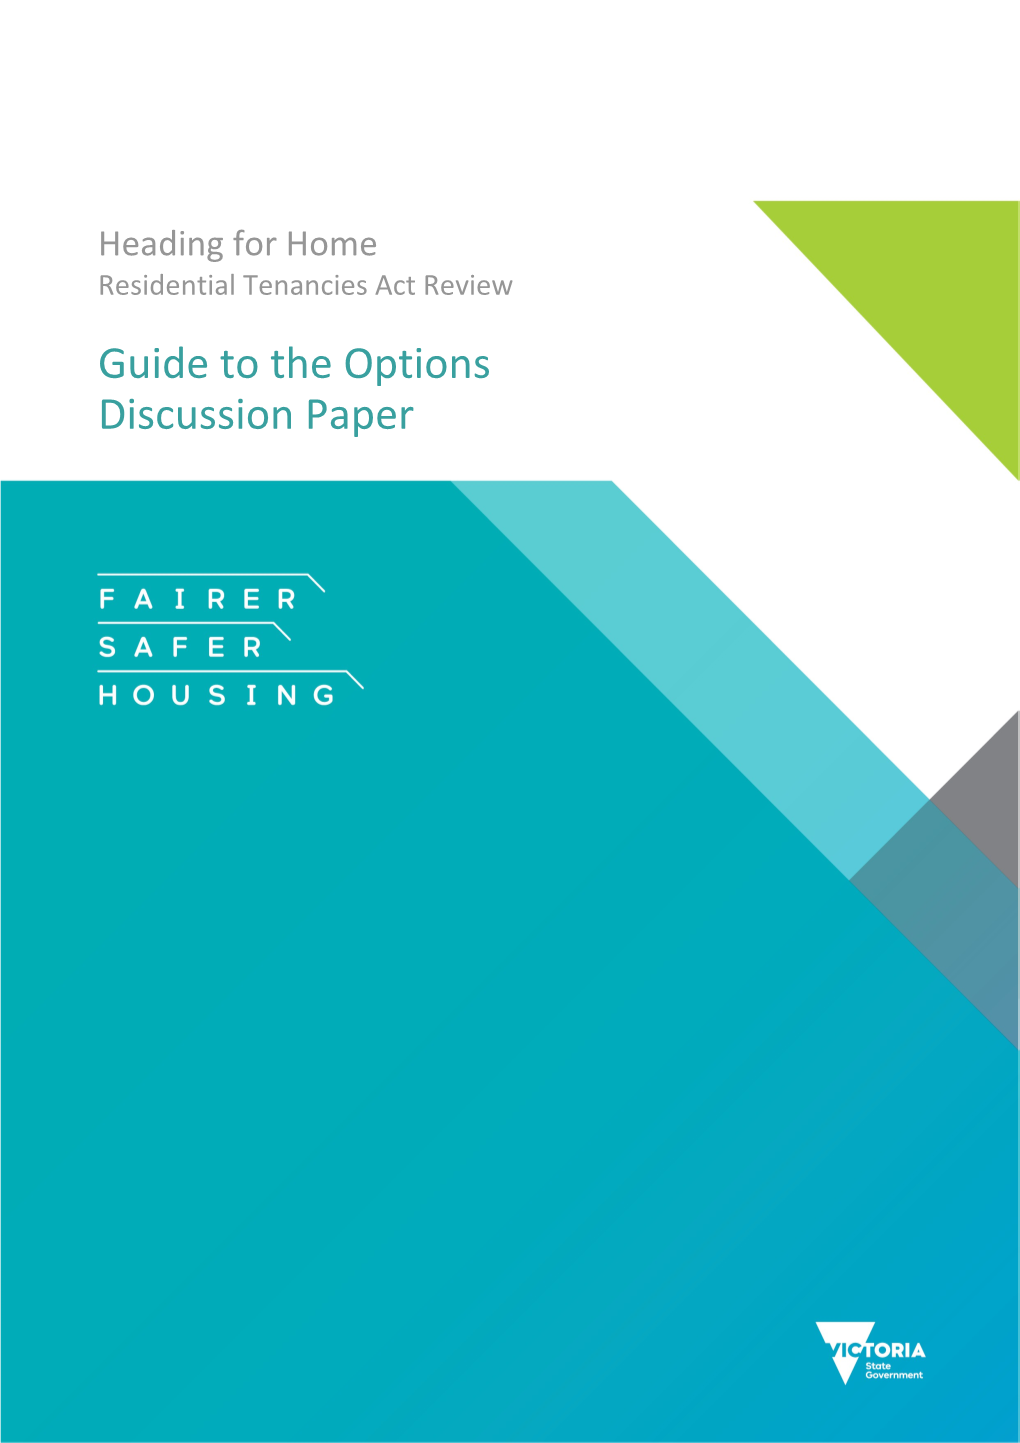 Heading for Home - Residential Tenancies Act Review: Guide to the Options Discussion Paper